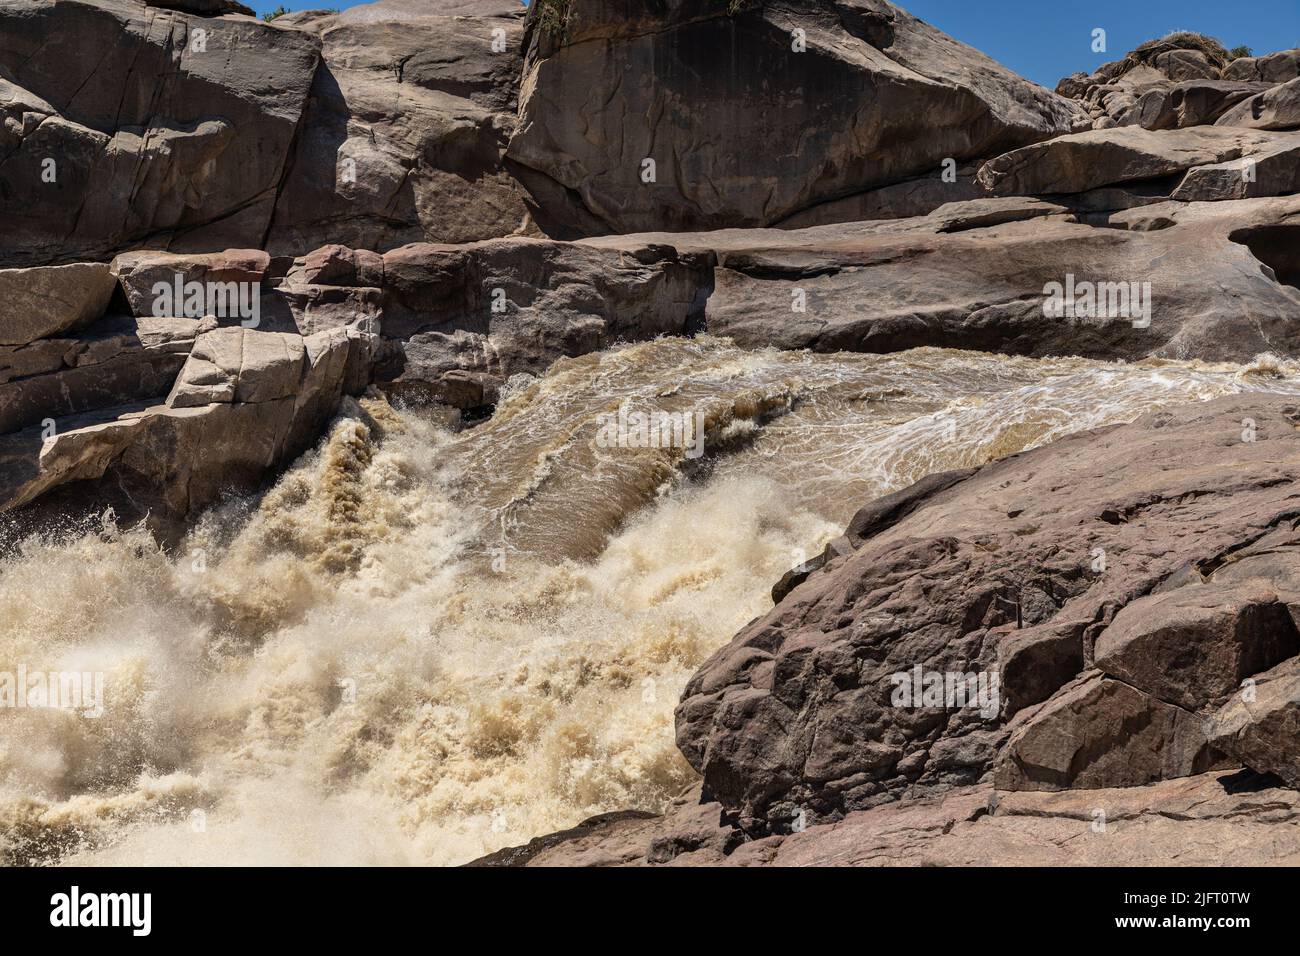 Rushing flood water at the Augrabies National Park in South Africa.  The water is the Orange river. Granite rock formations can be seen. Stock Photo